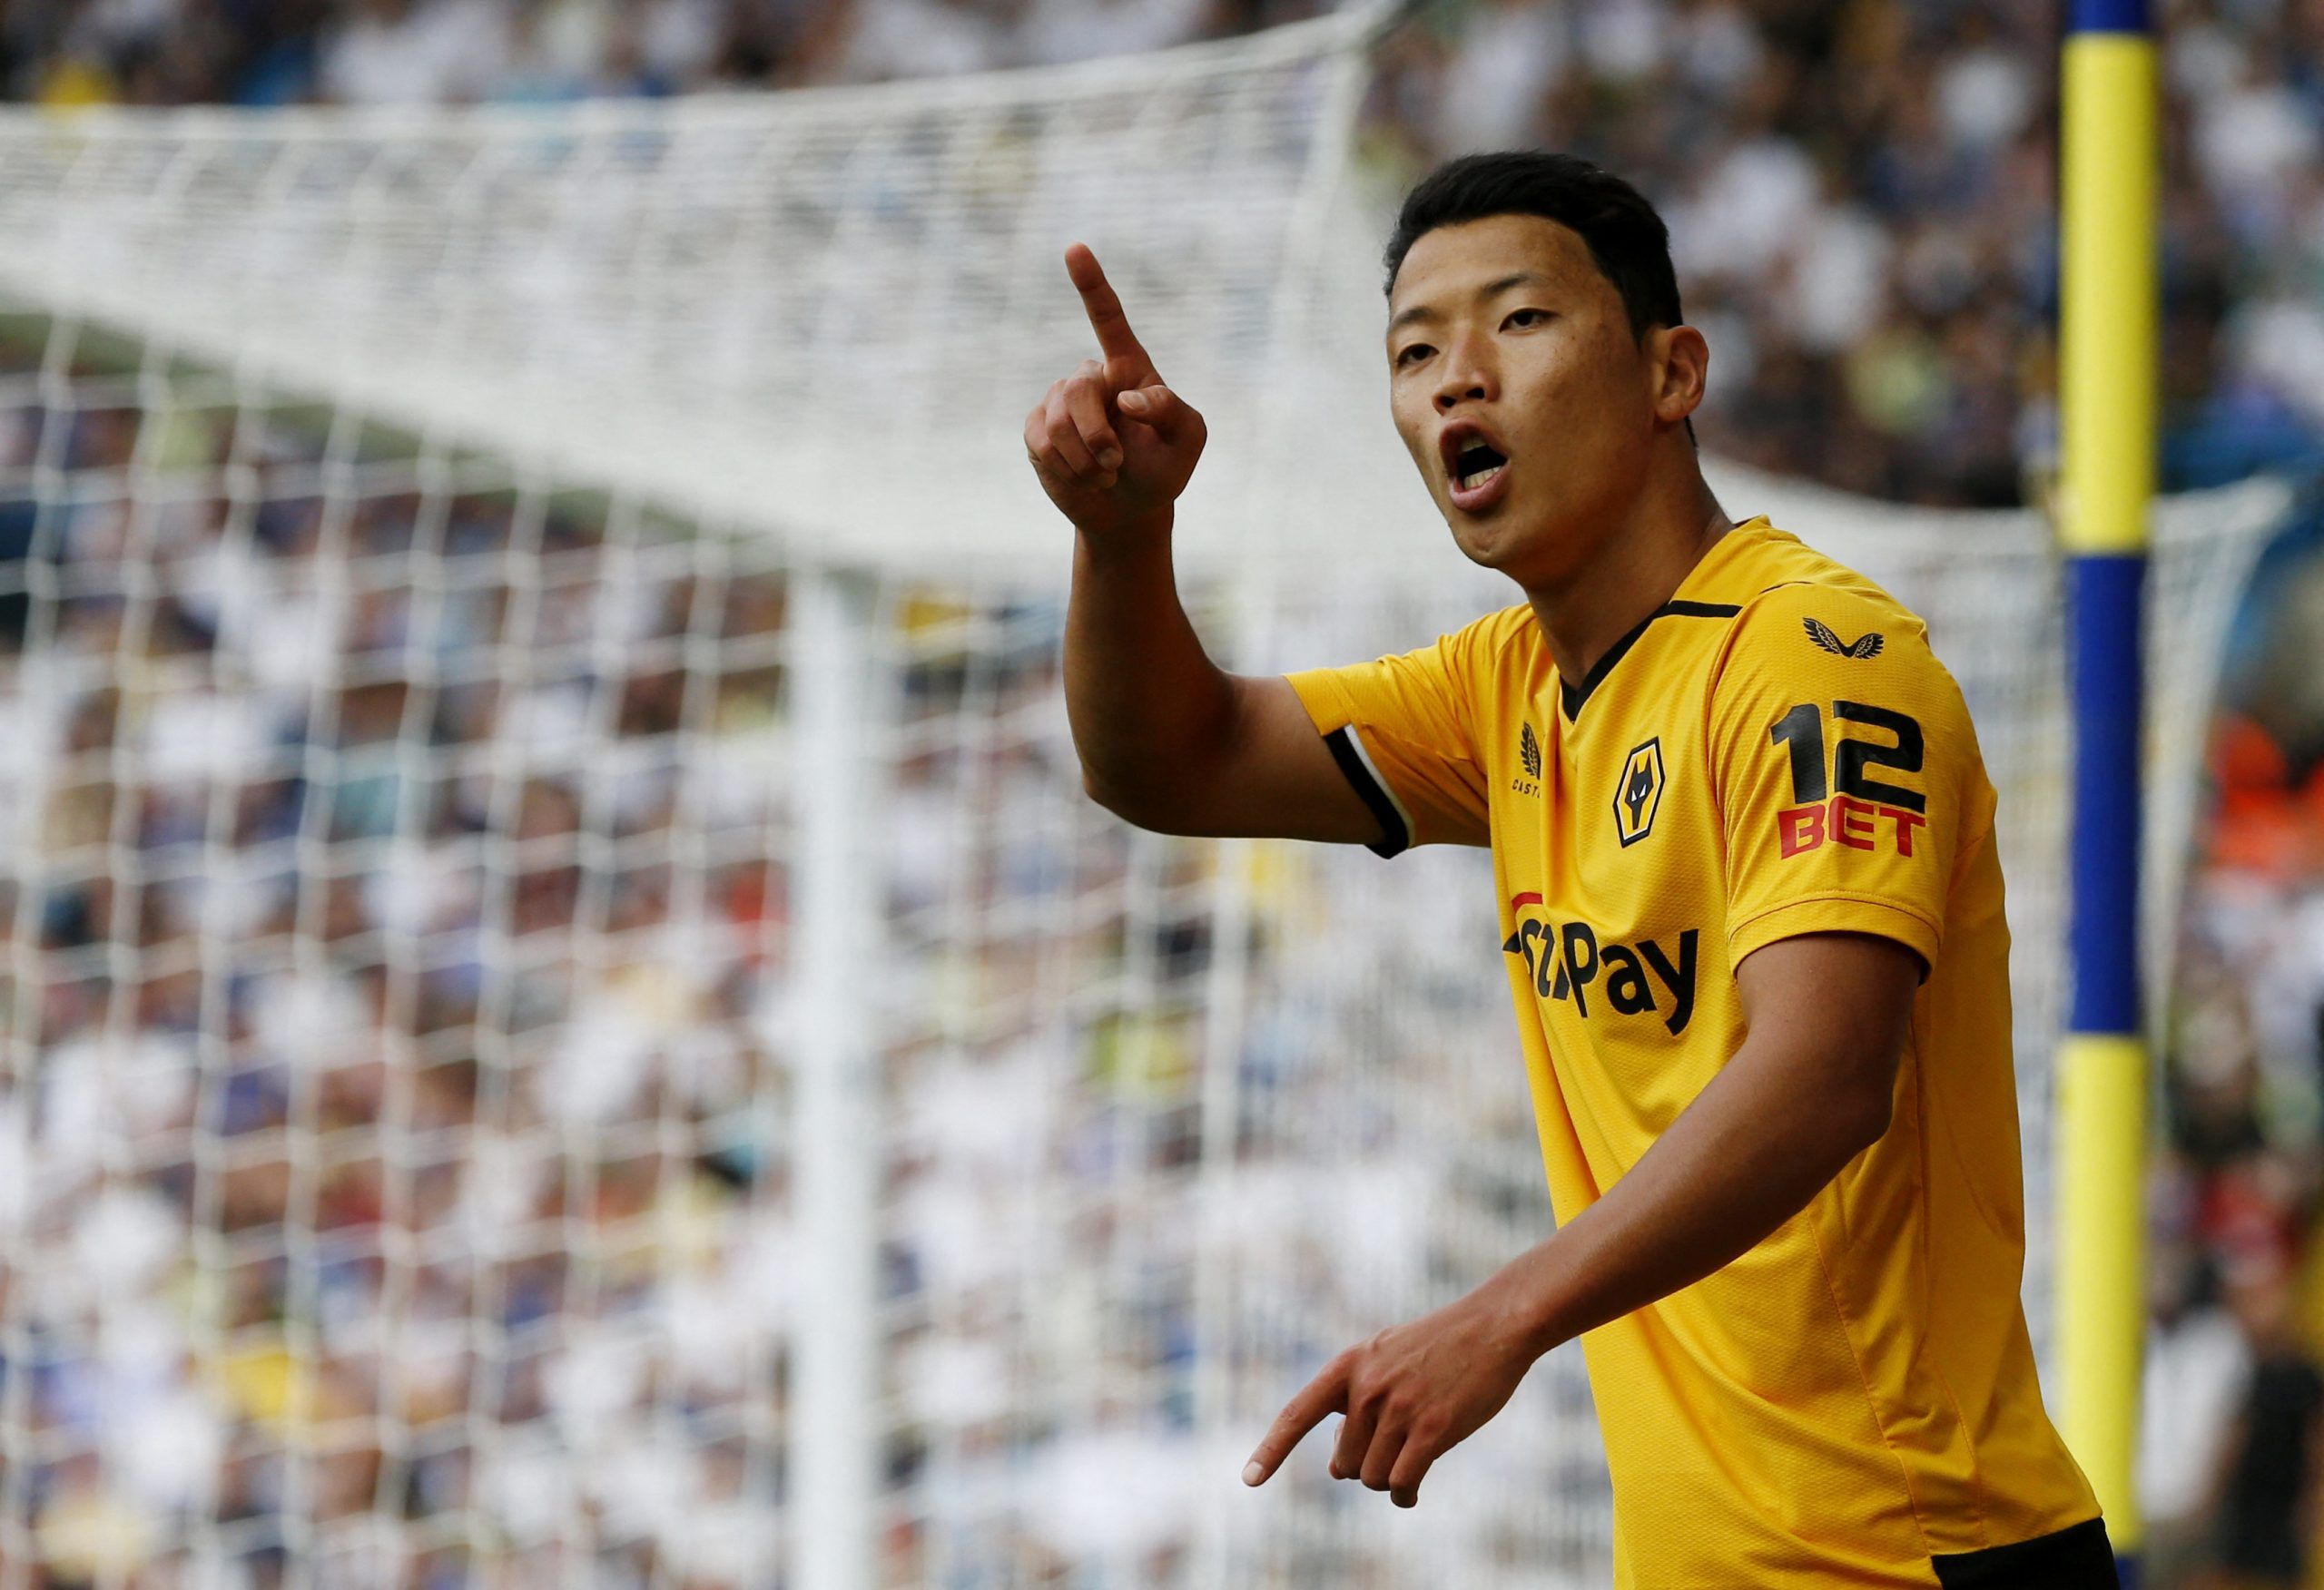 Soccer Football - Premier League - Leeds United v Wolverhampton Wanderers - Elland Road, Leeds, Britain - August 6, 2022 Wolverhampton Wanderers' Hwang Hee-chan reacts Action Images via Reuters/Ed Sykes EDITORIAL USE ONLY. No use with unauthorized audio, video, data, fixture lists, club/league logos or 'live' services. Online in-match use limited to 75 images, no video emulation. No use in betting, games or single club /league/player publications.  Please contact your account representative for 